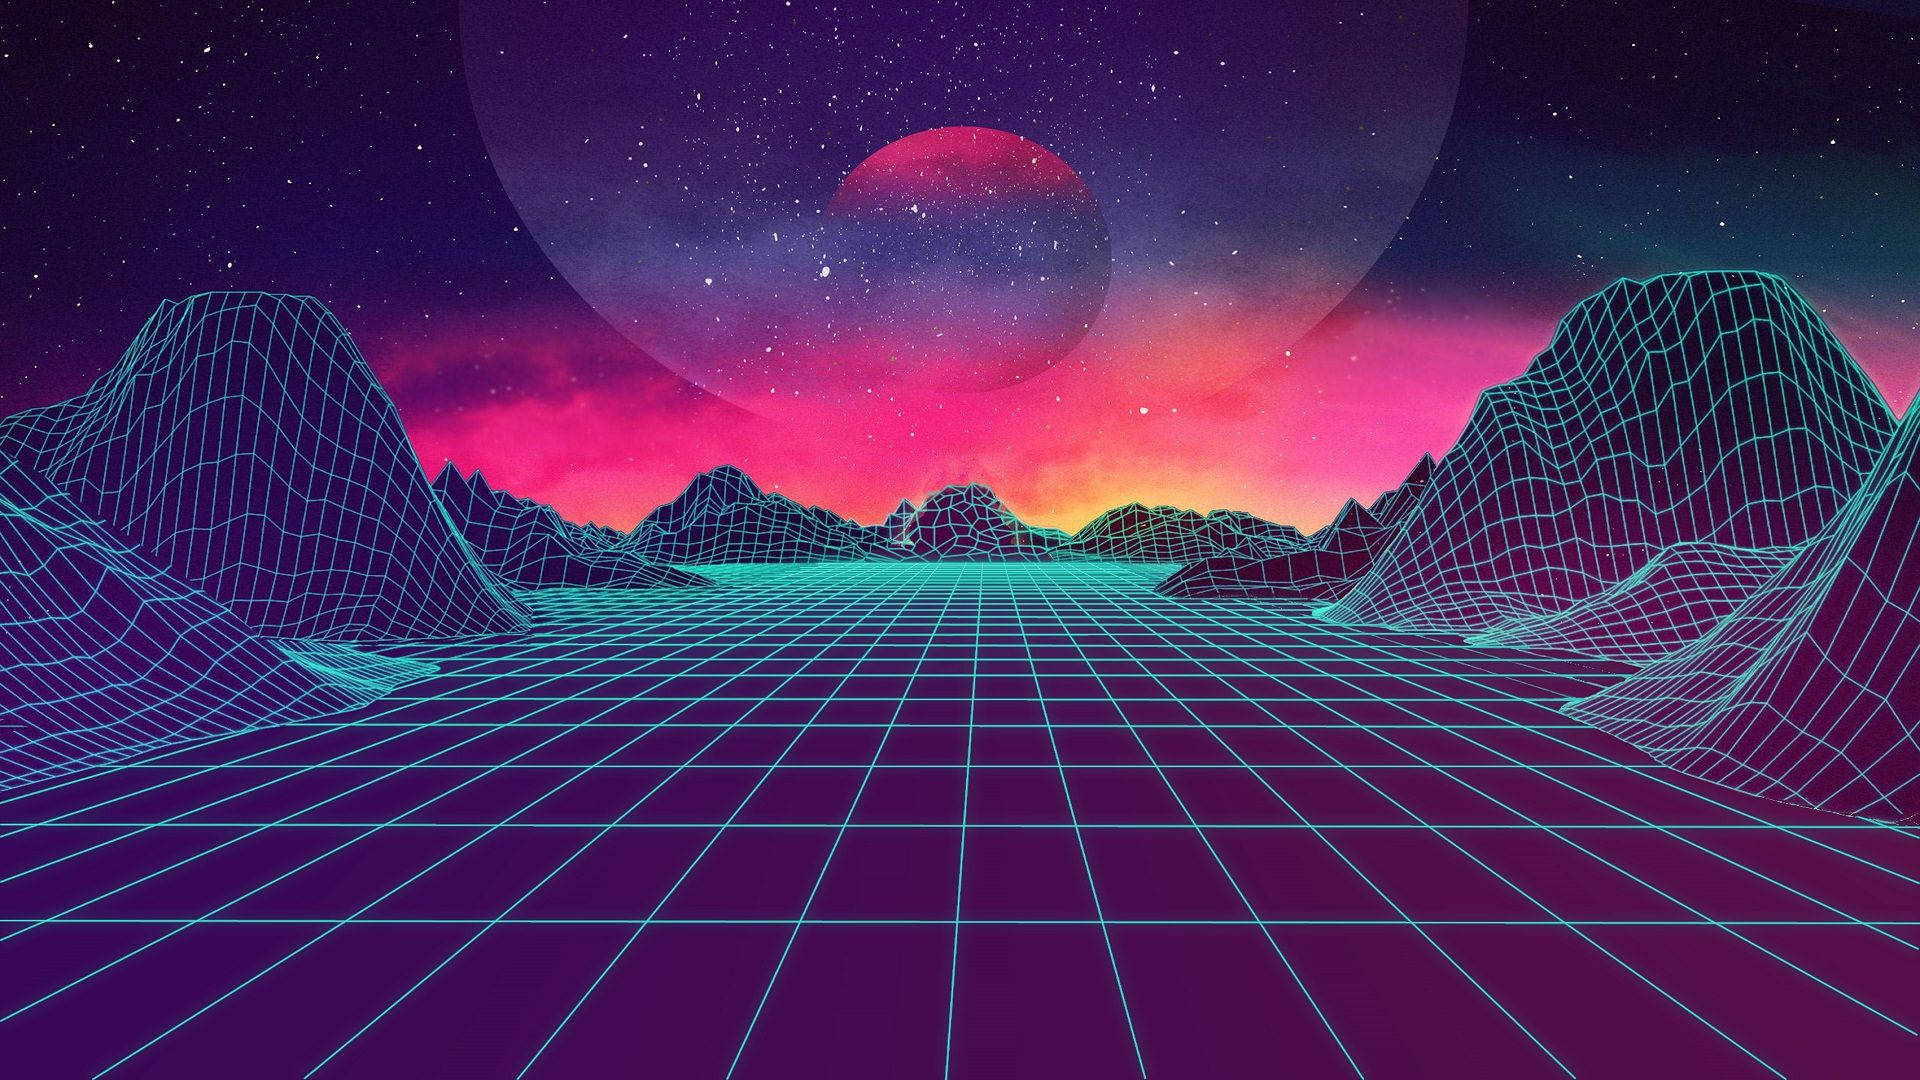 Graphic Outrun Video Game Wallpaper